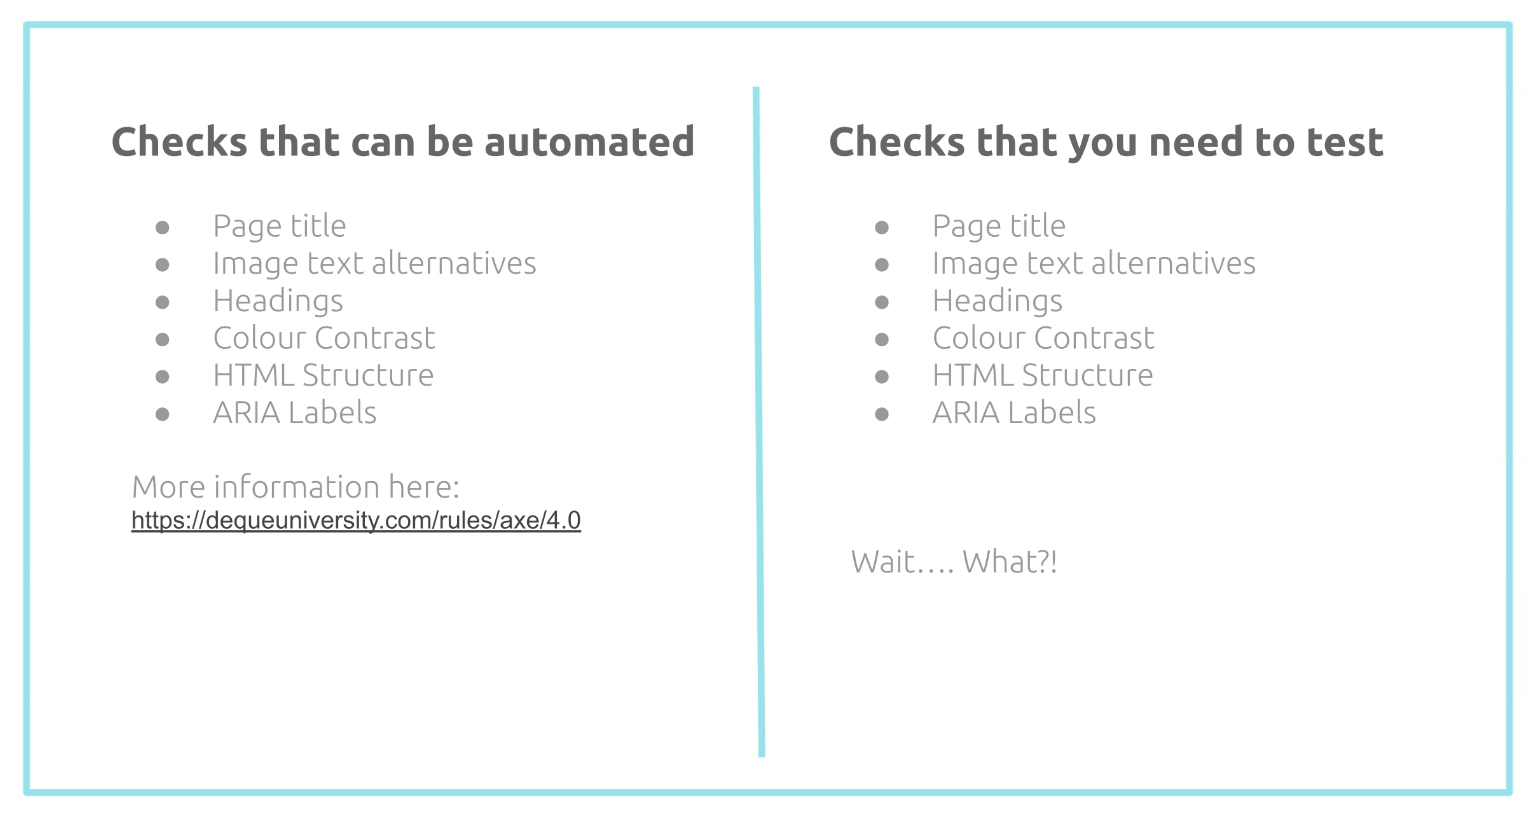 checks that you need to test. same as the ones that need to be automated.